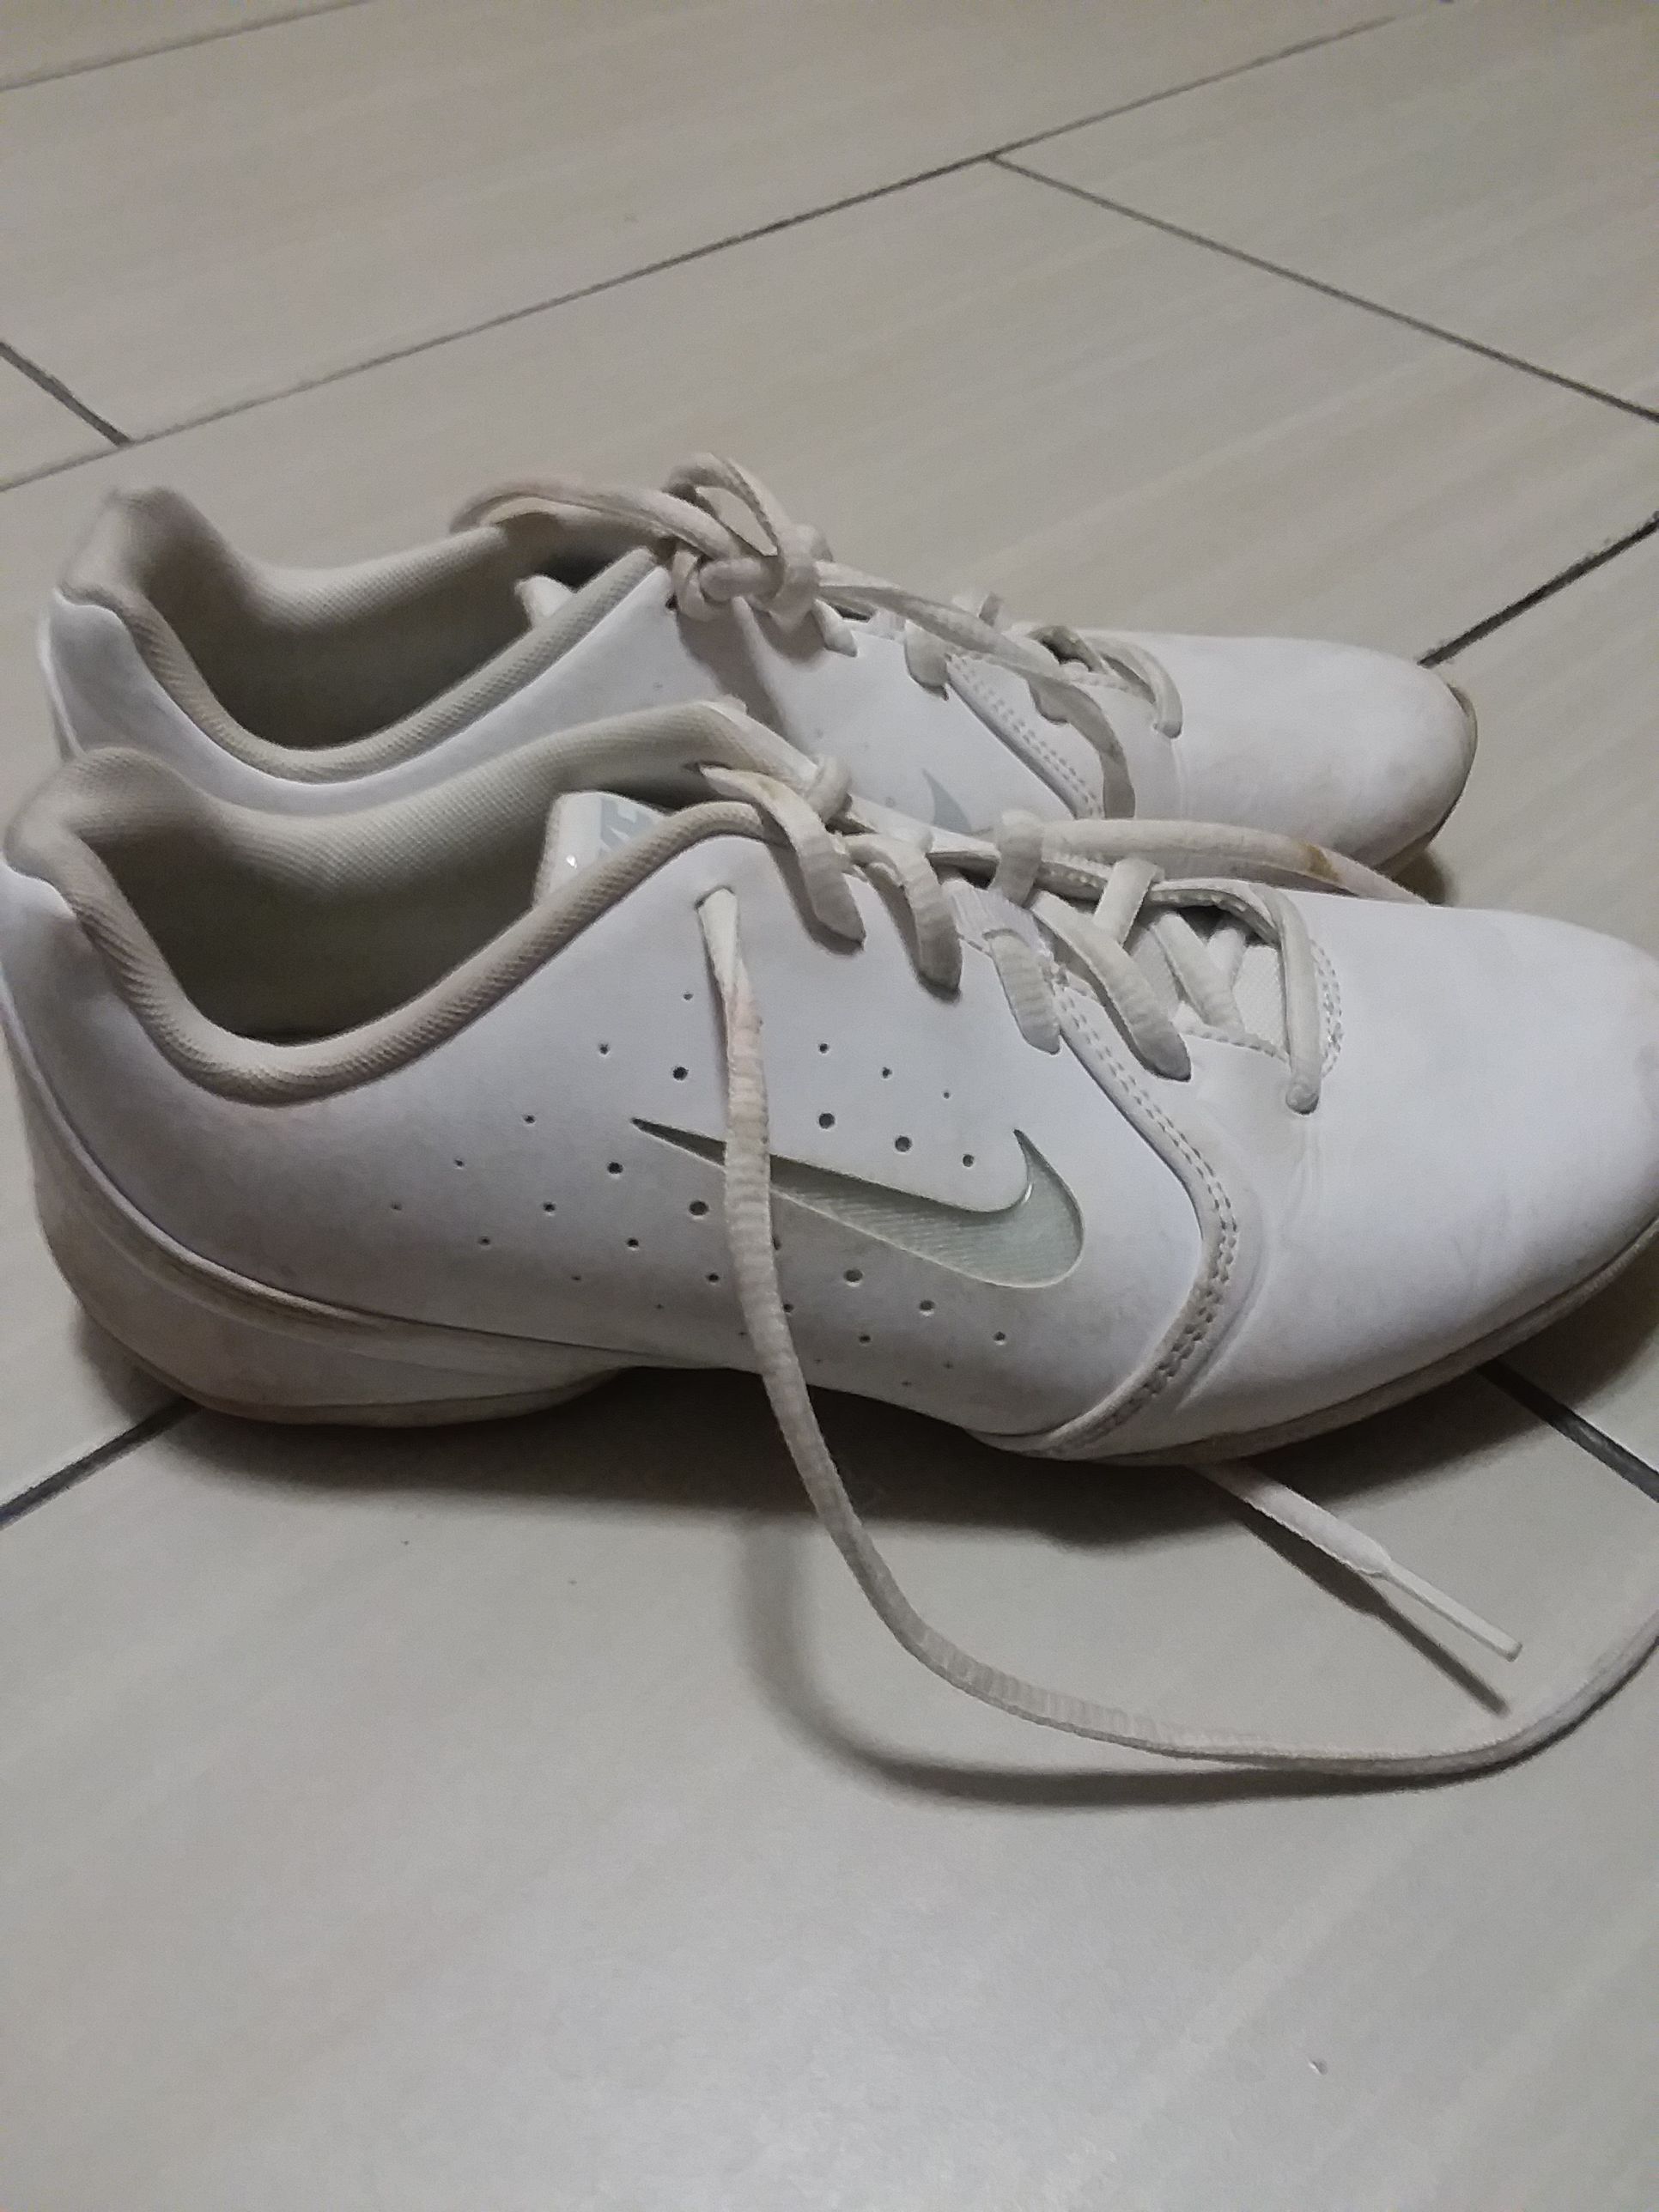 Size 7 and 1/2 Nike shoe